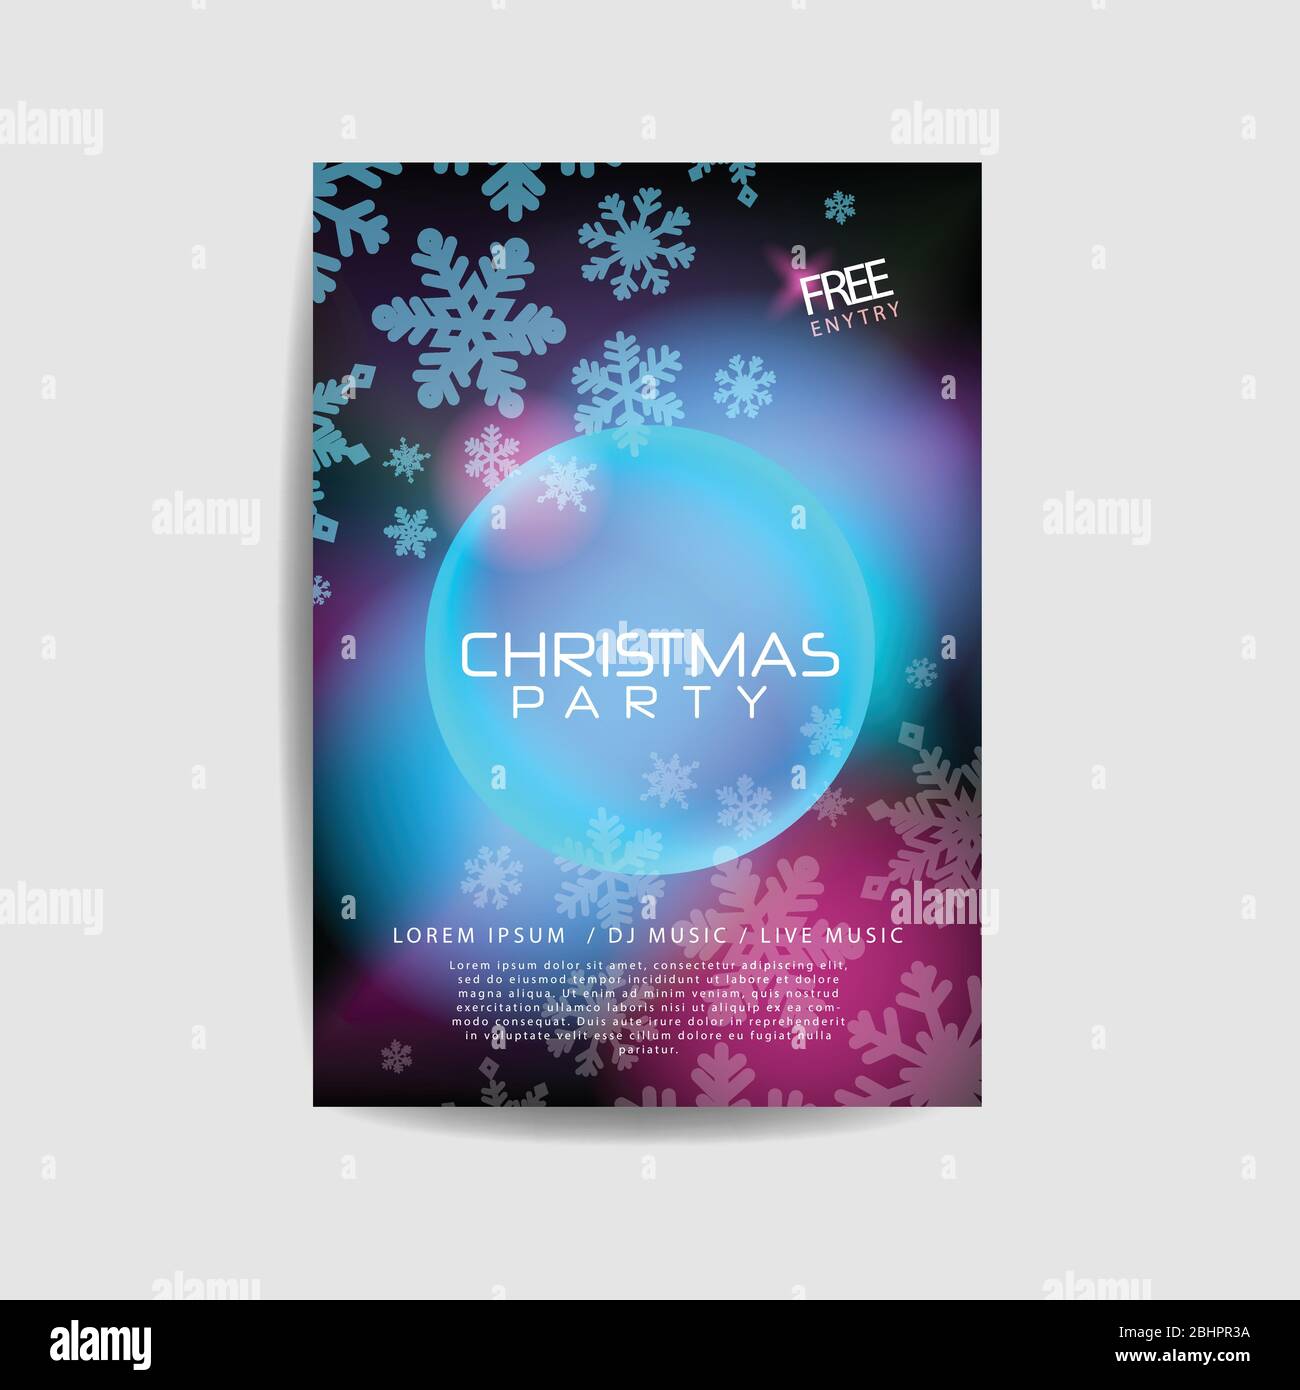 Merry Christmas party invitation Party Invitation Card Christmas Party poster Holiday design template Christmas Stock Vector